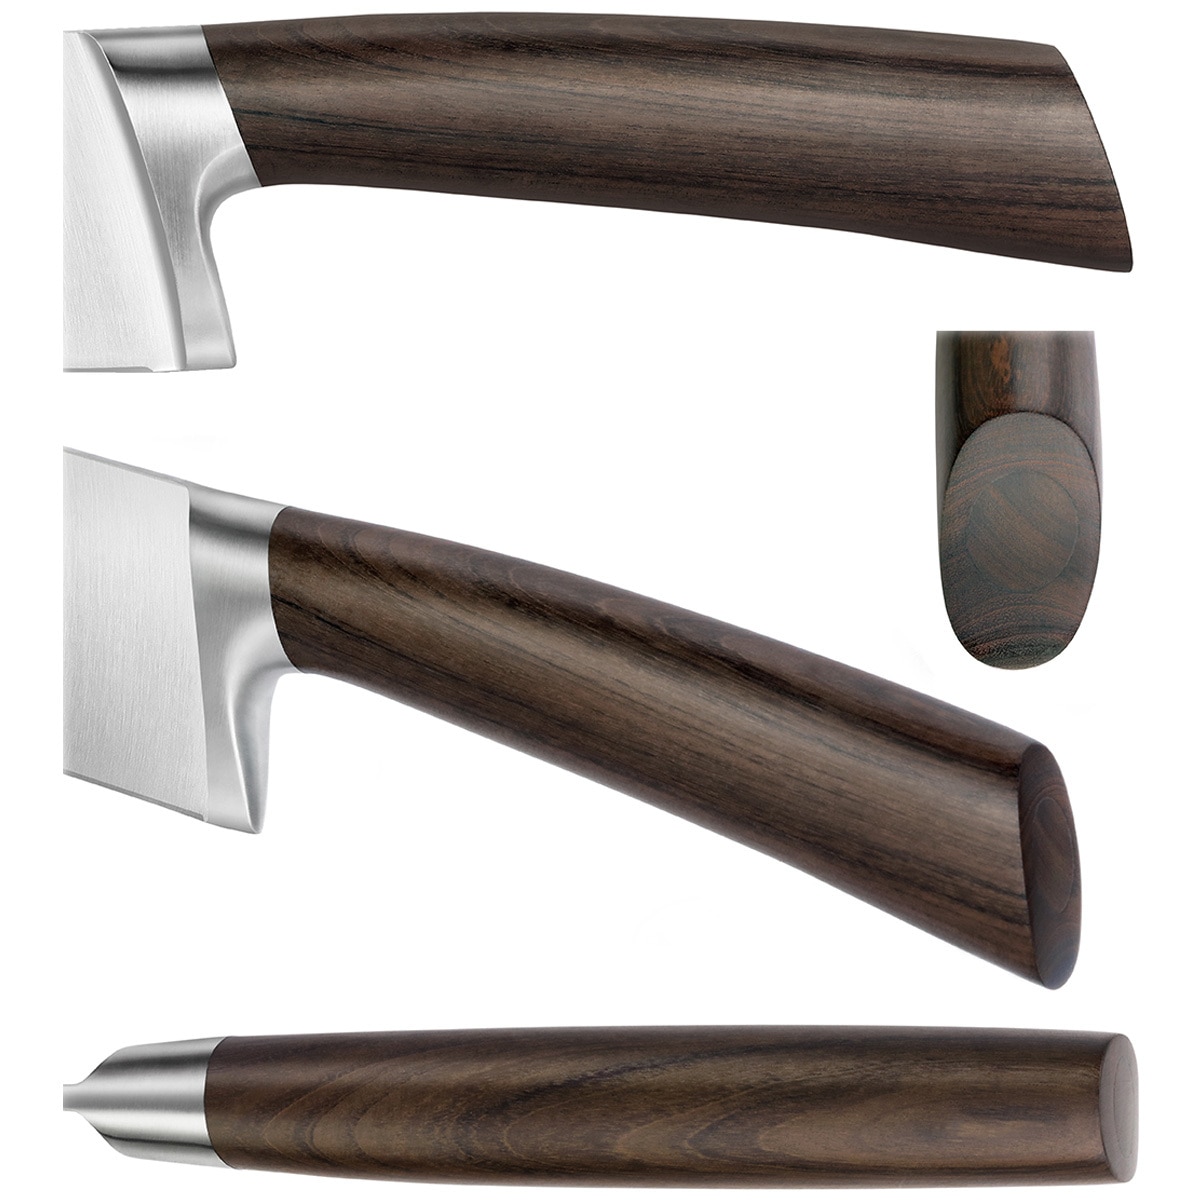 Cangshan A Series Swedish Steel Forged 3-Piece Knife Set